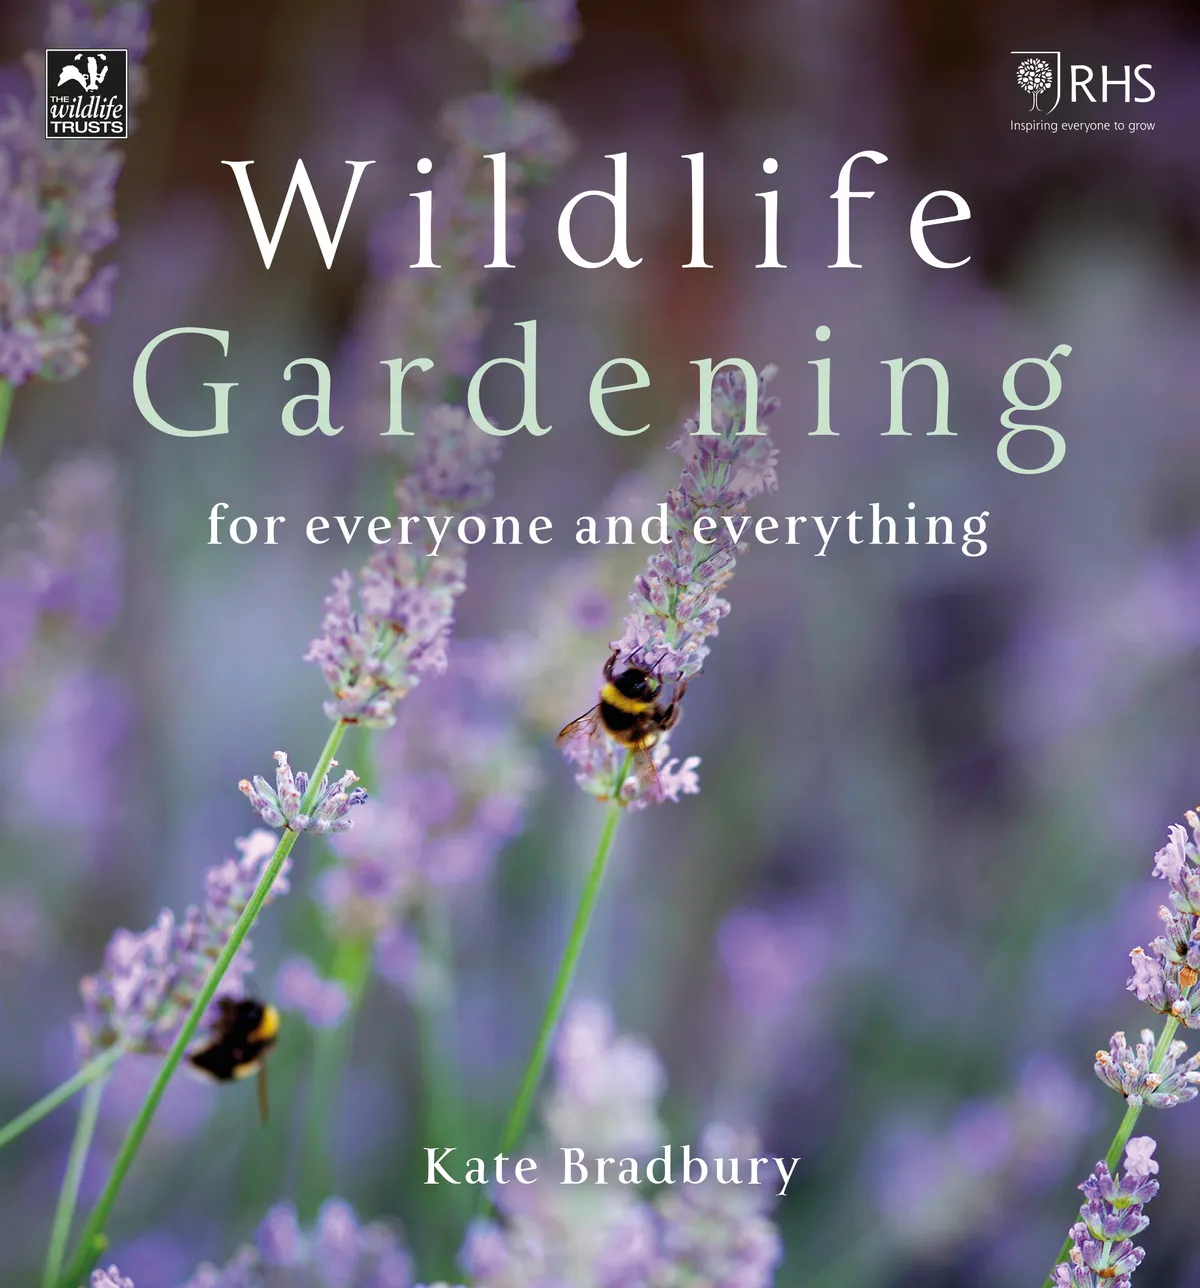 Wildlife gardening for everyone and everything by Kate Bradbury book cover